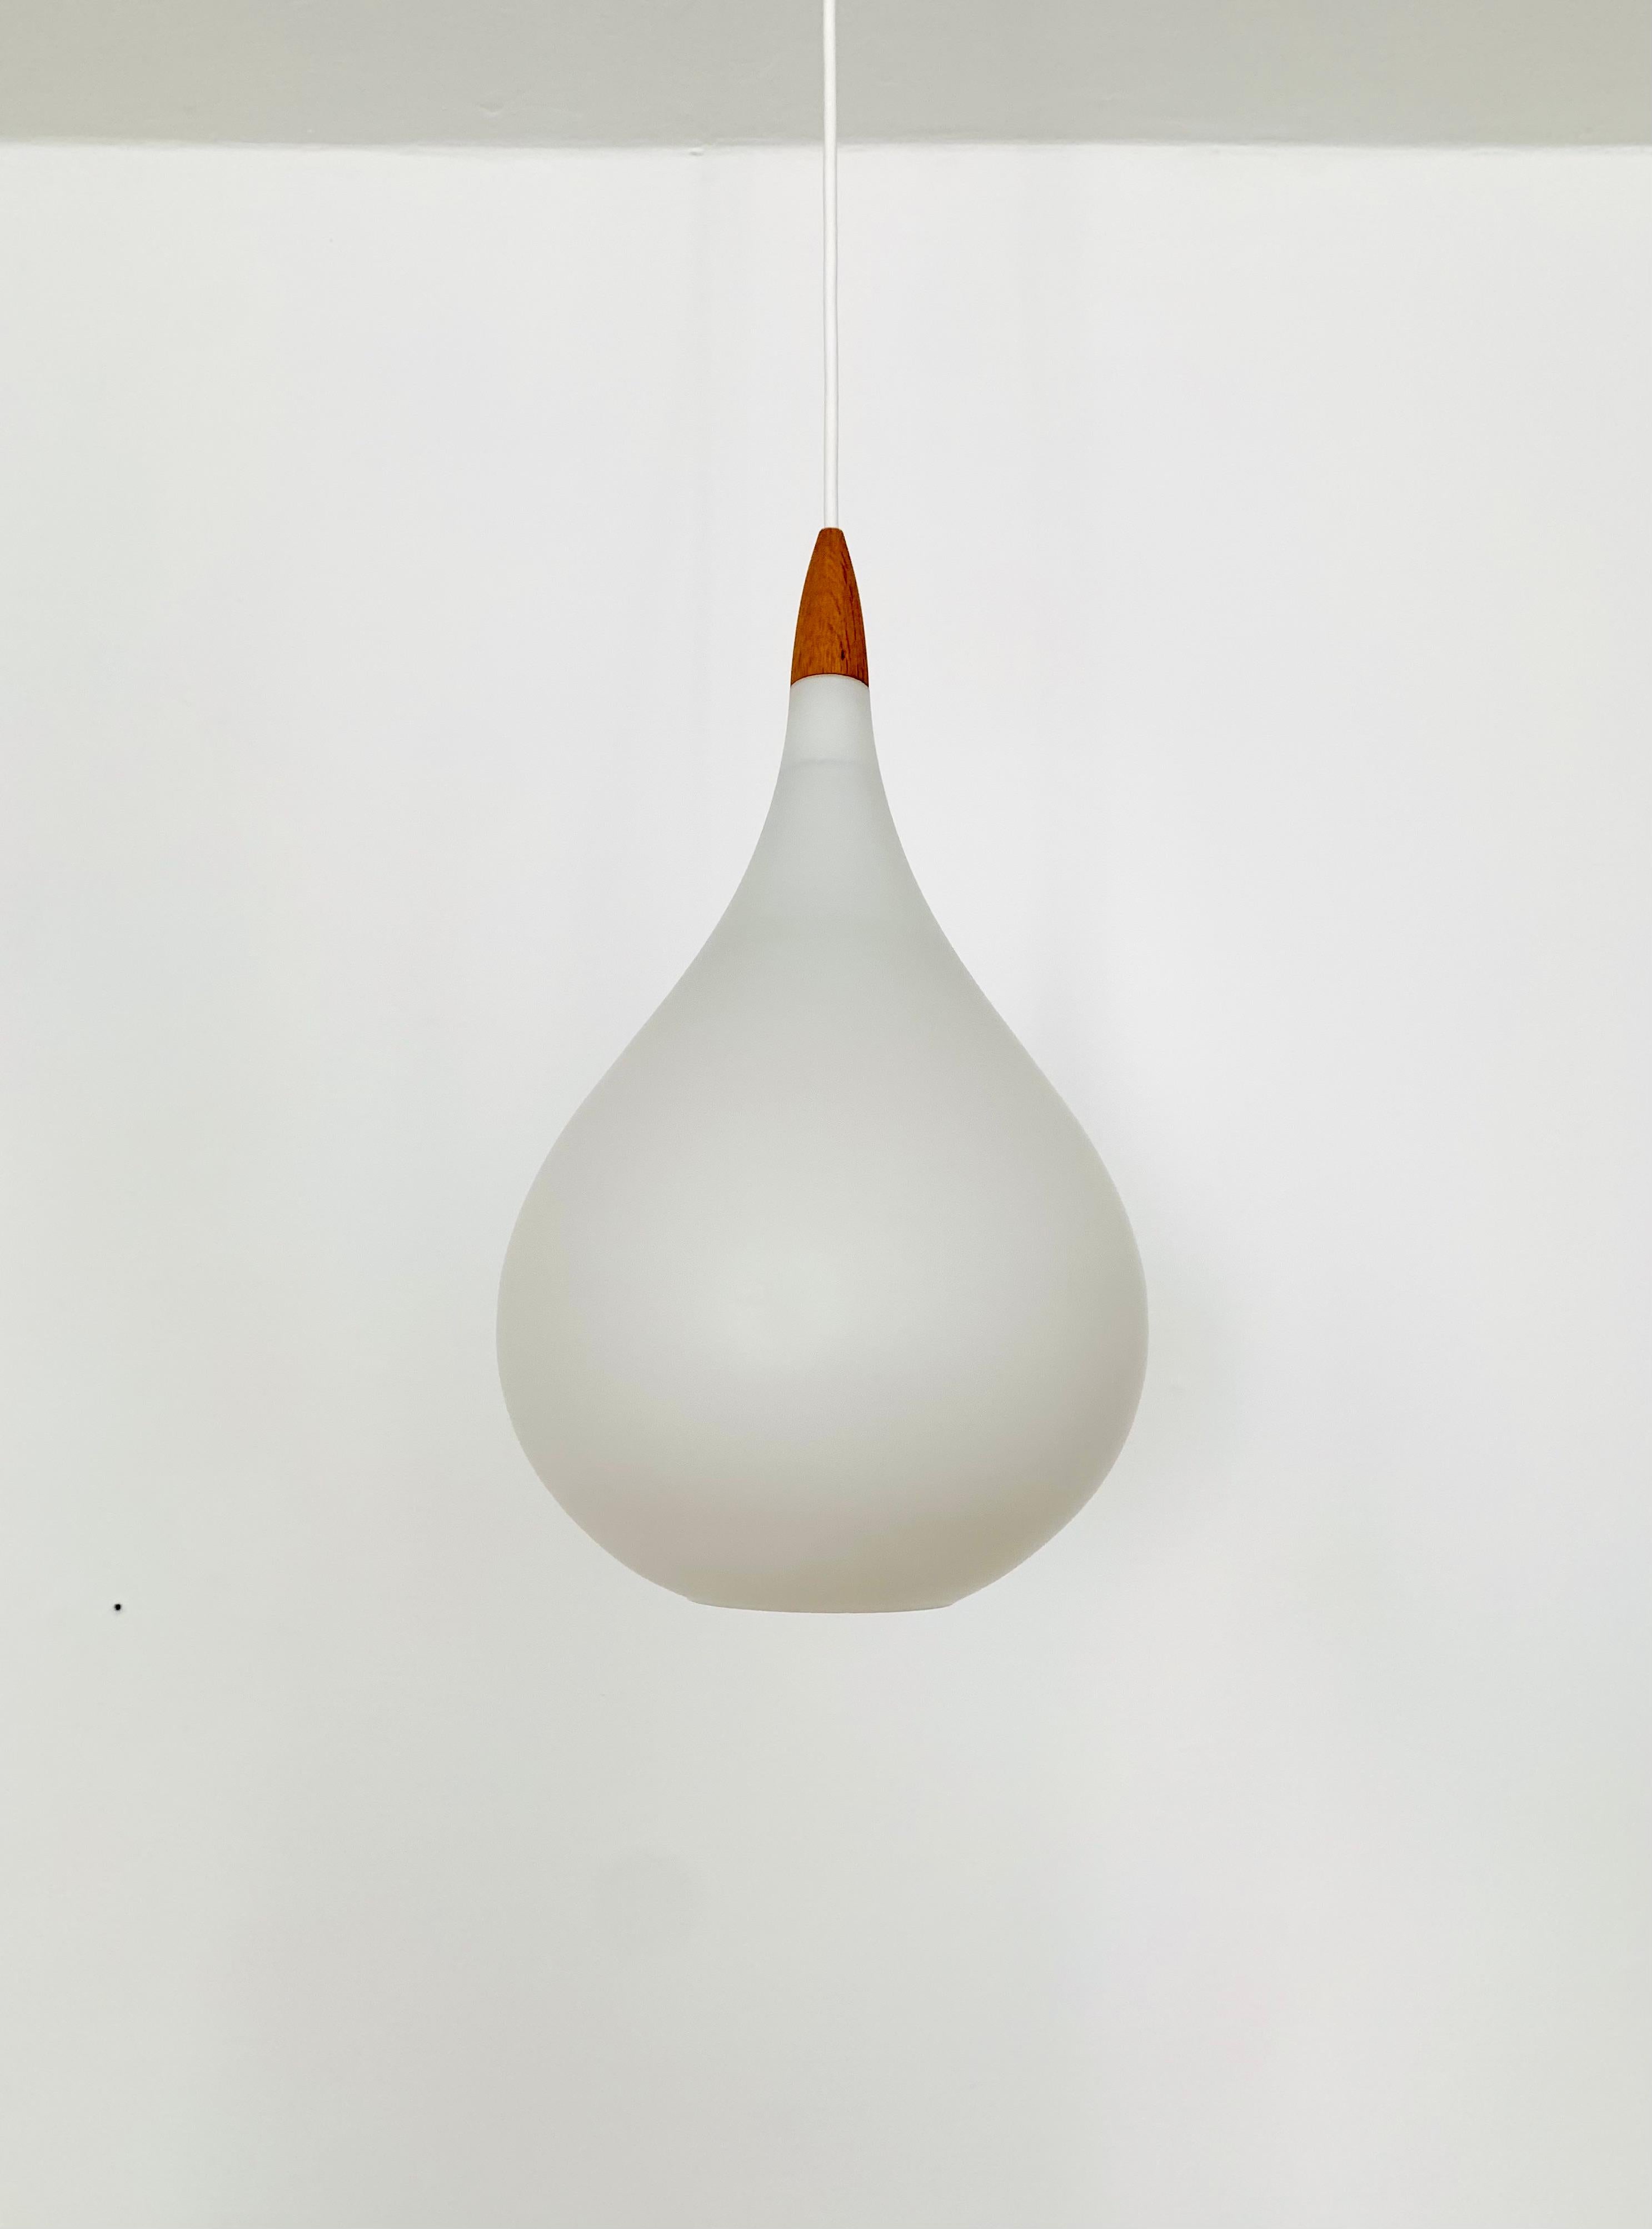 Wonderful Swedish opal glass pendant lamps from the 1960s.
Great and exceptionally minimalist design with a fantastically elegant look.
Very nice oak wood details.

Manufacturer: Luxury
Design: Uno and Östen Kristiansson
Around